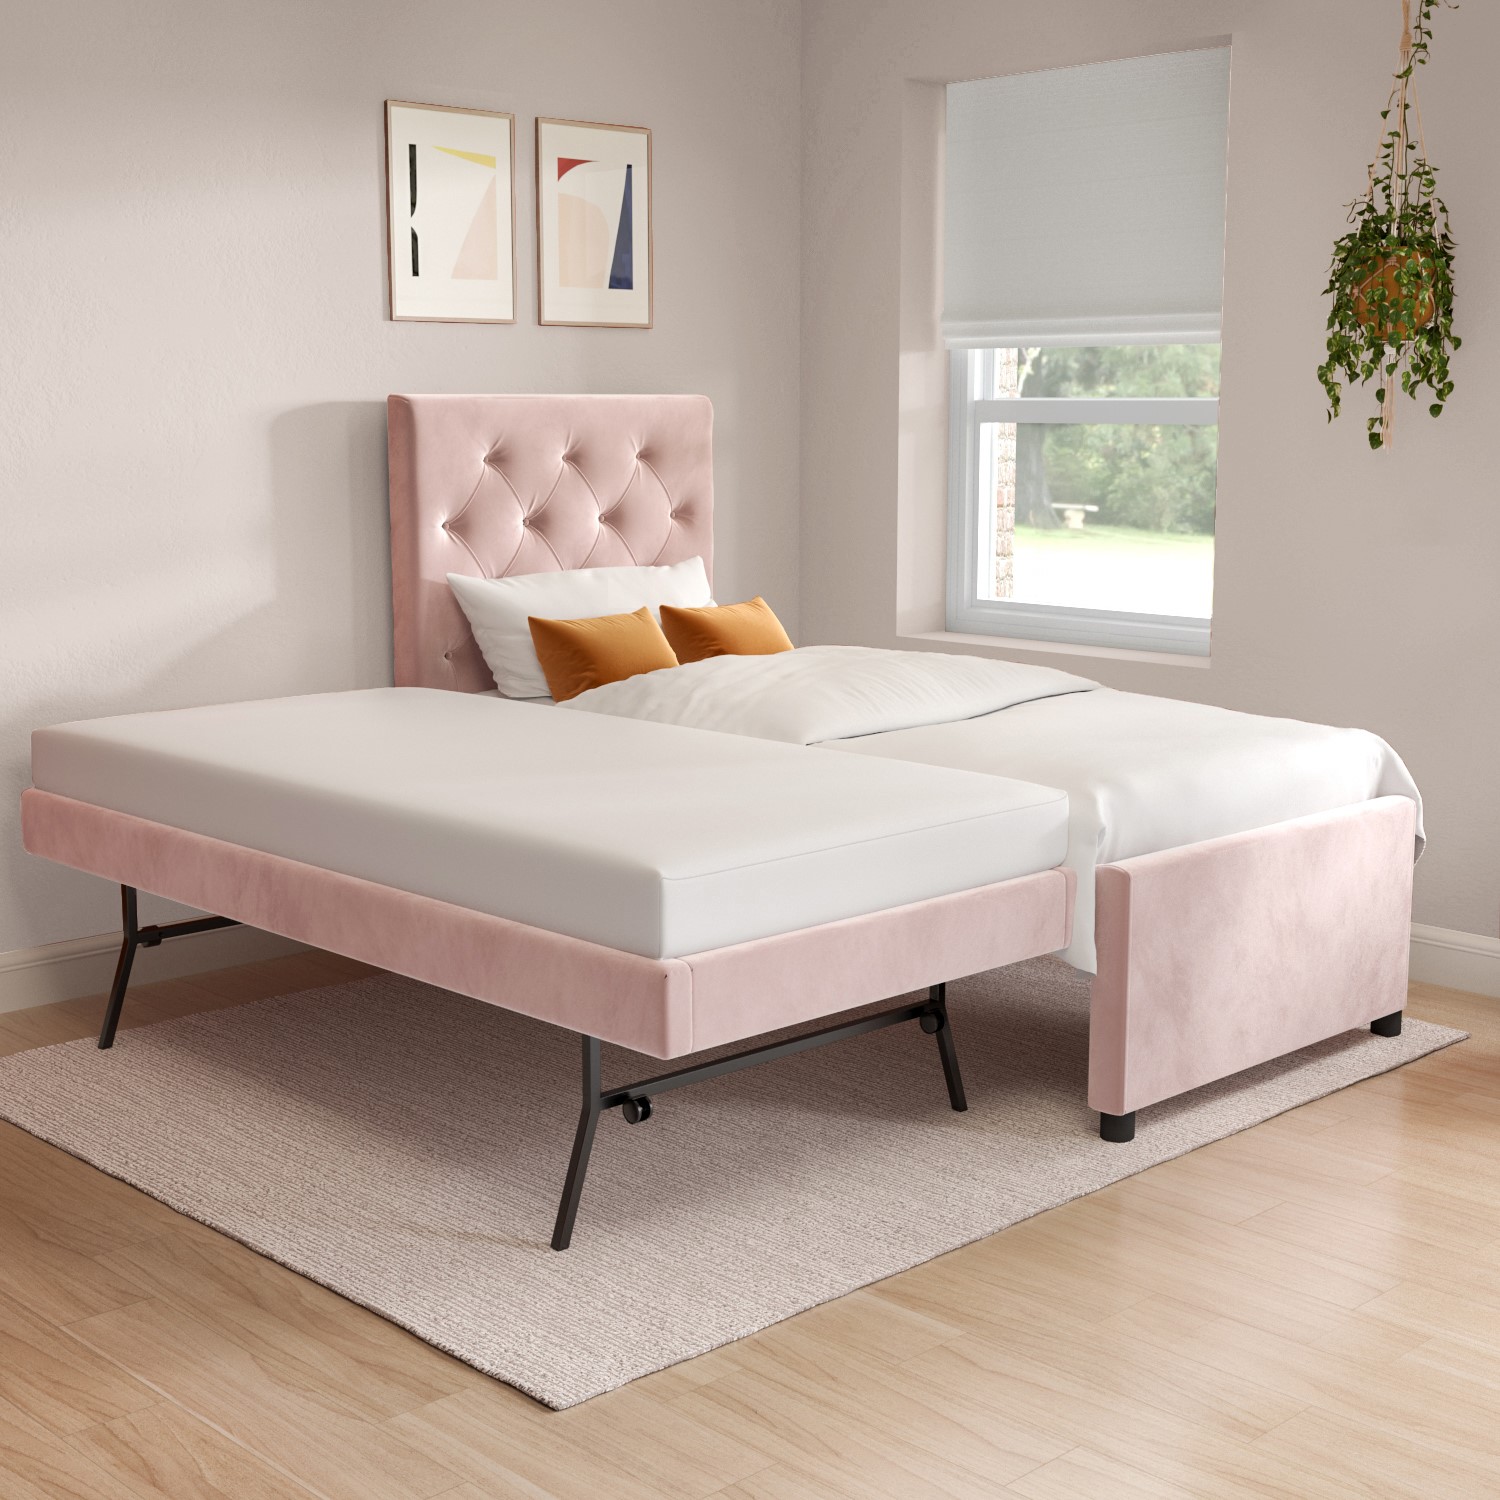 Read more about Single pink velvet guest bed with trundle isabel